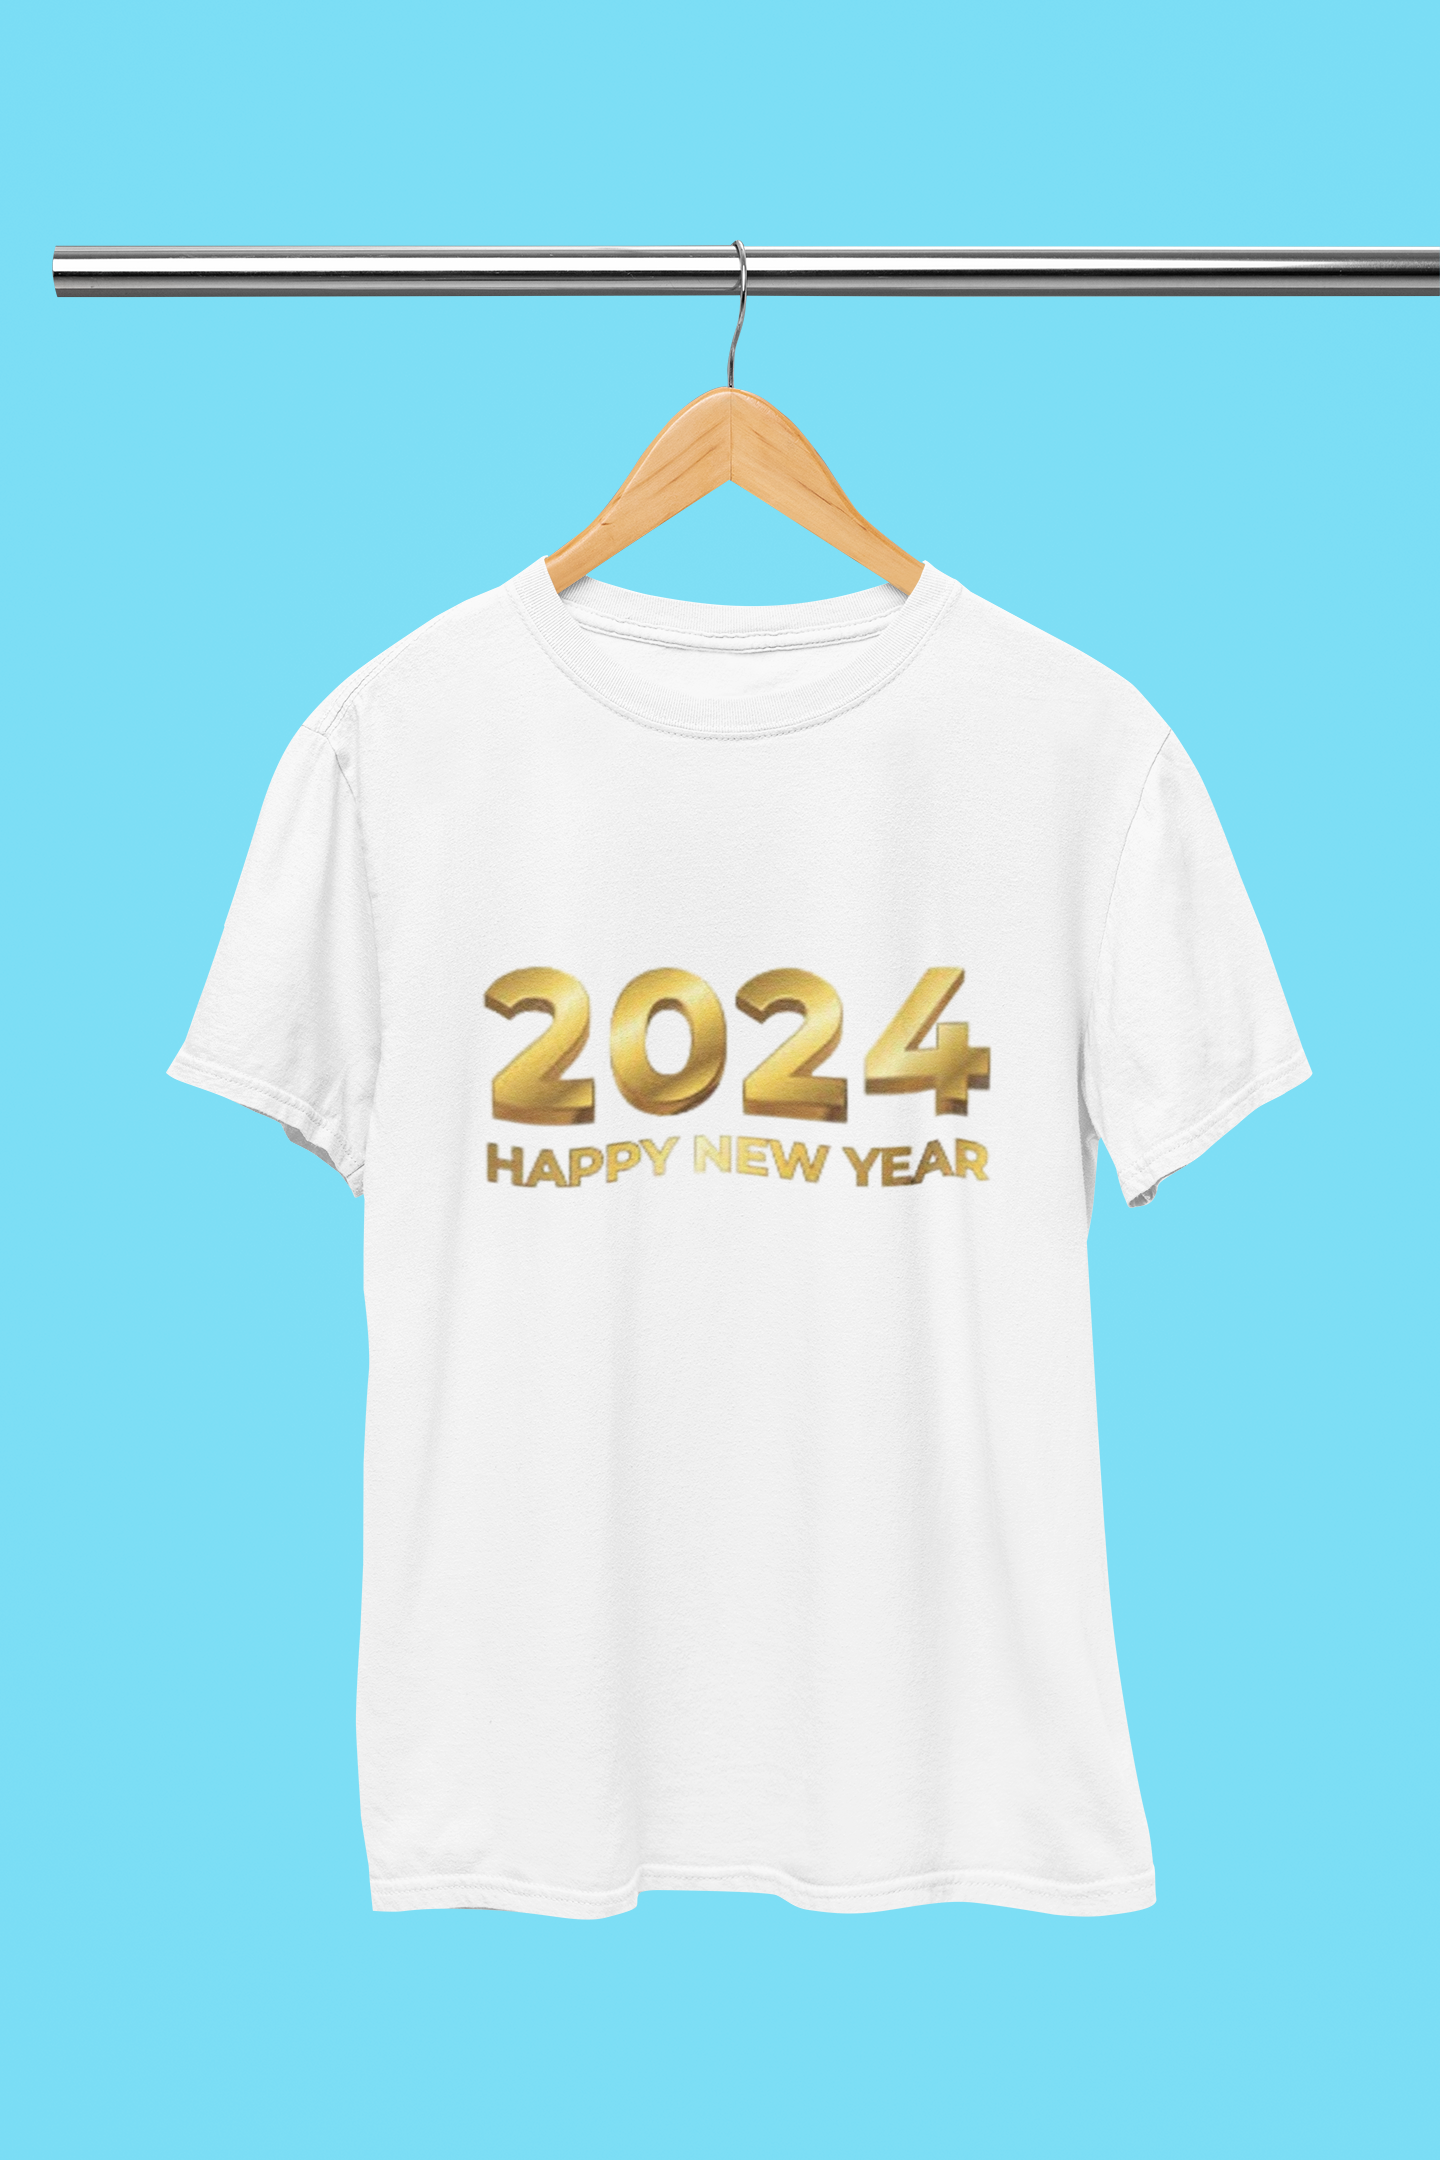 NEW YEAR SPECIAL 2024 T-SHIRT